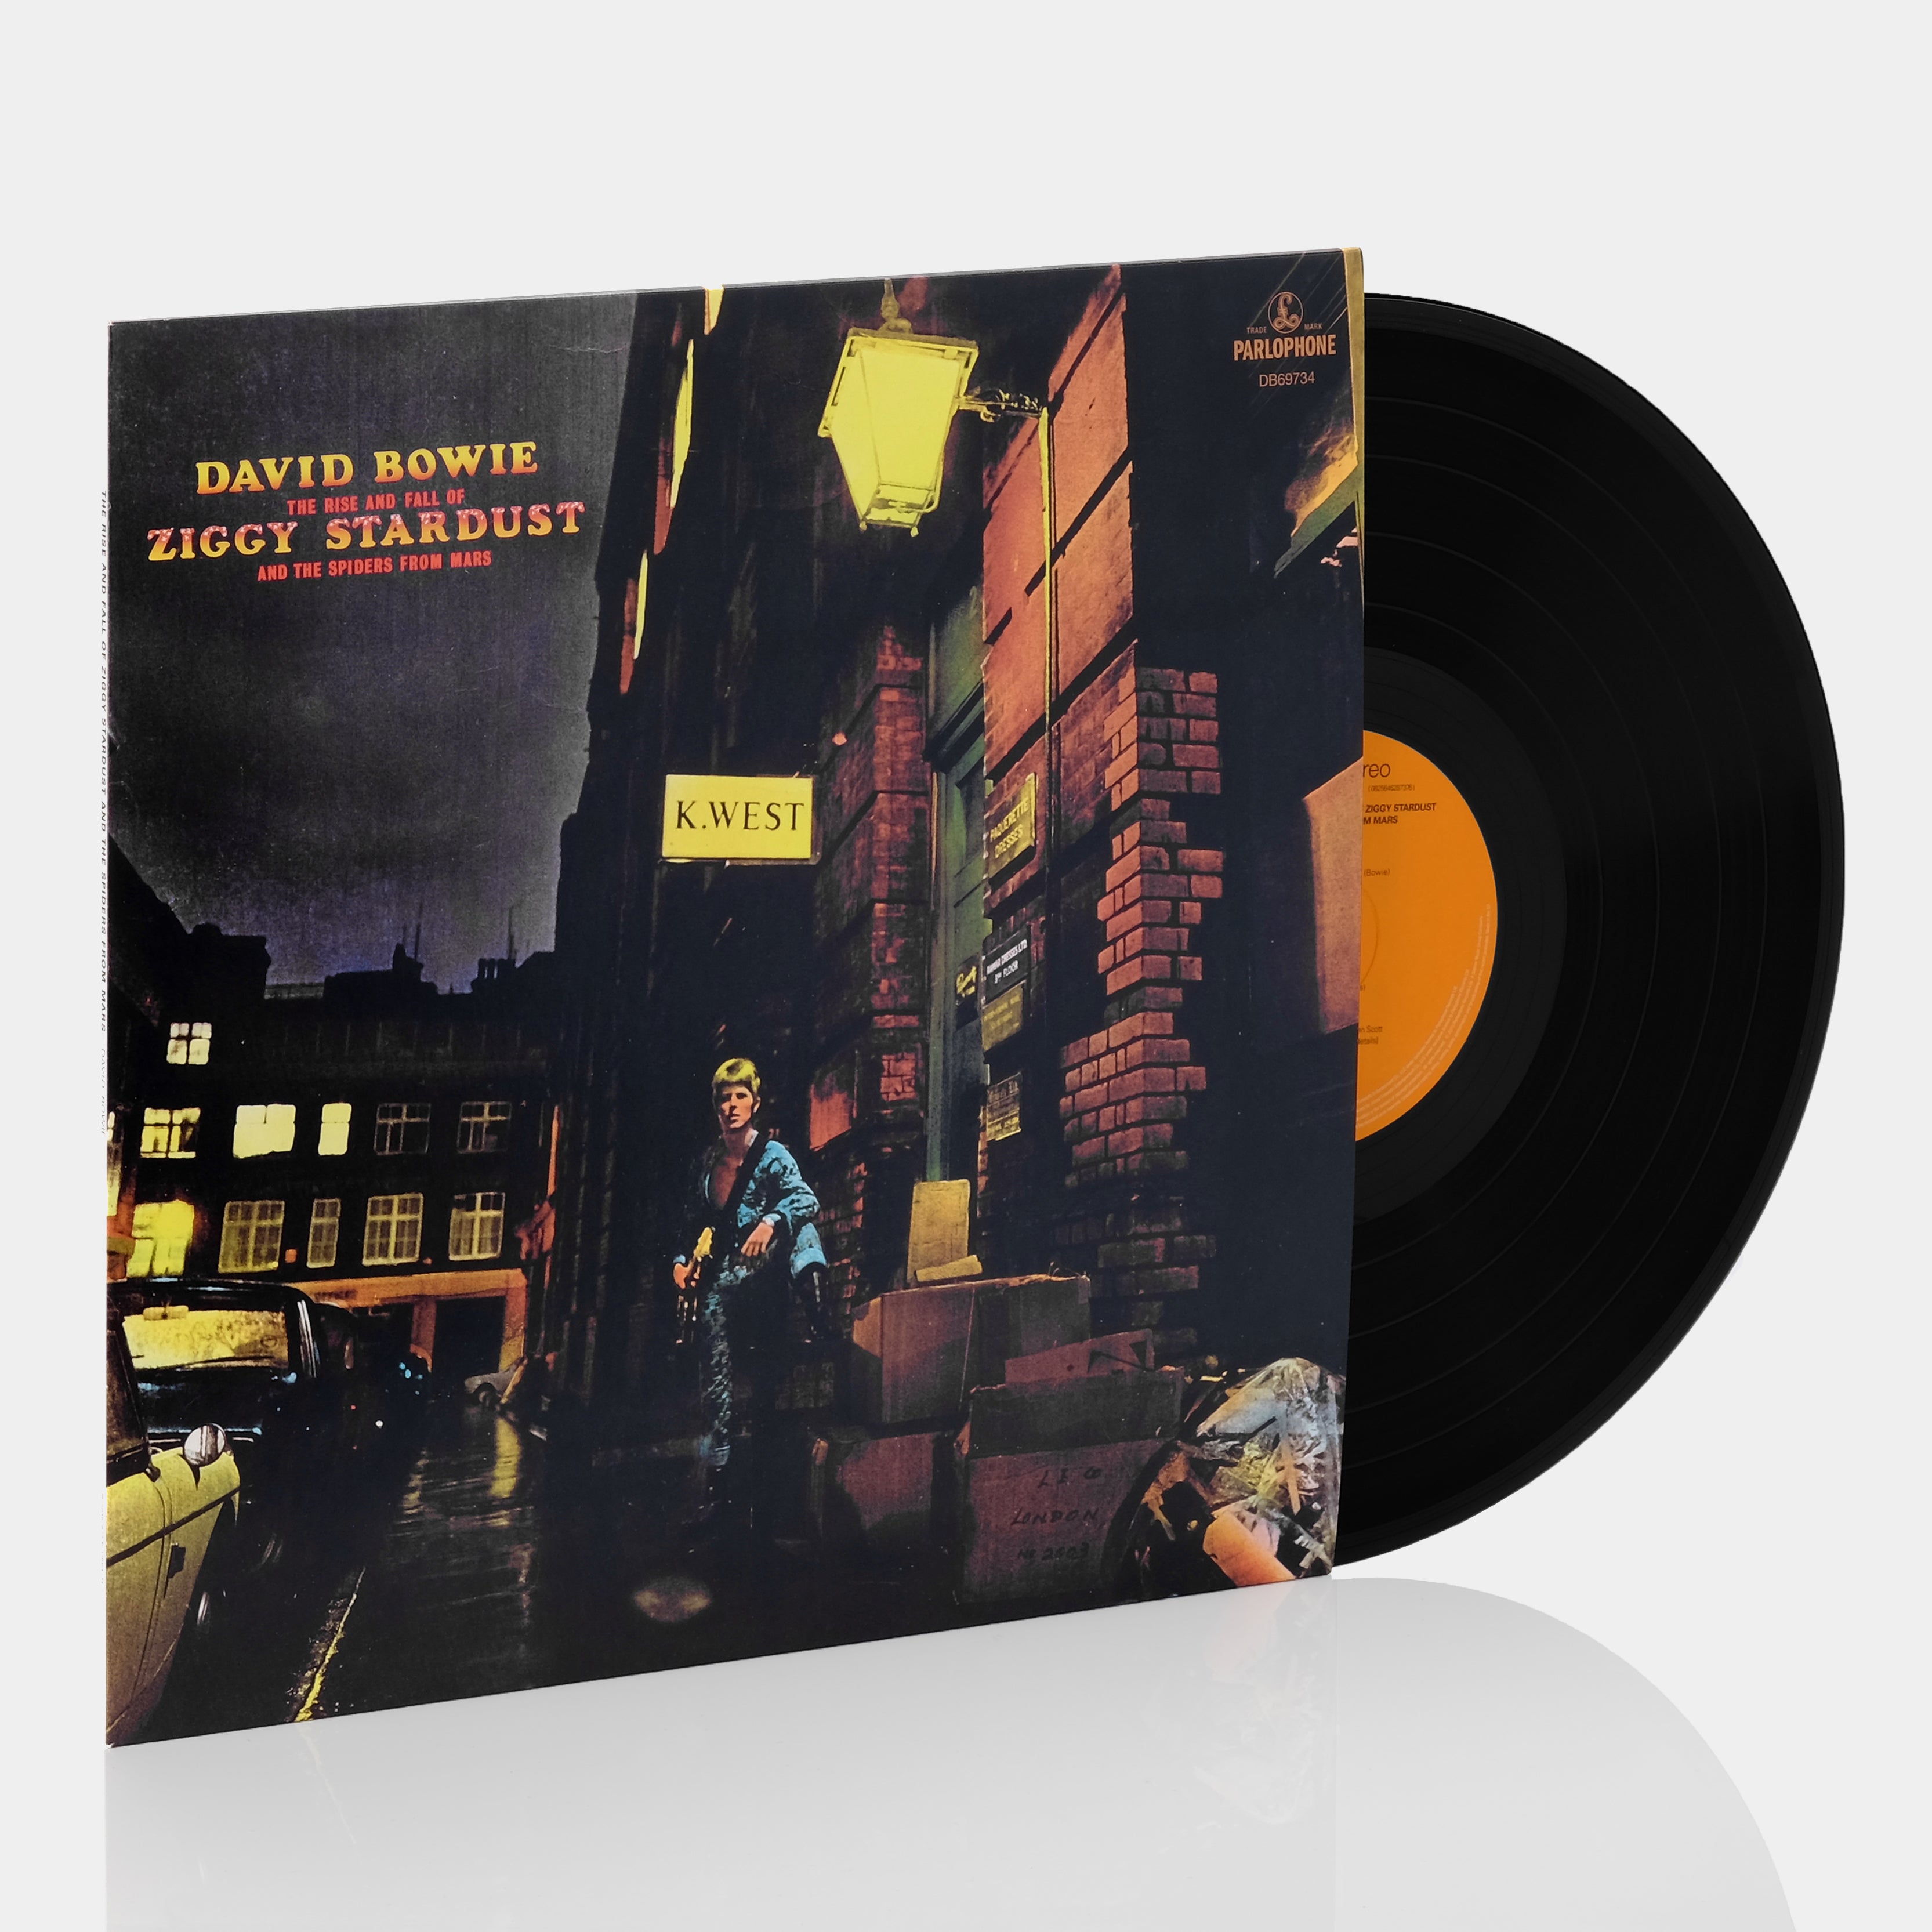 David Bowie - The Rise And Fall Of Ziggy Stardust And The Spiders From Mars  LP Vinyl Record